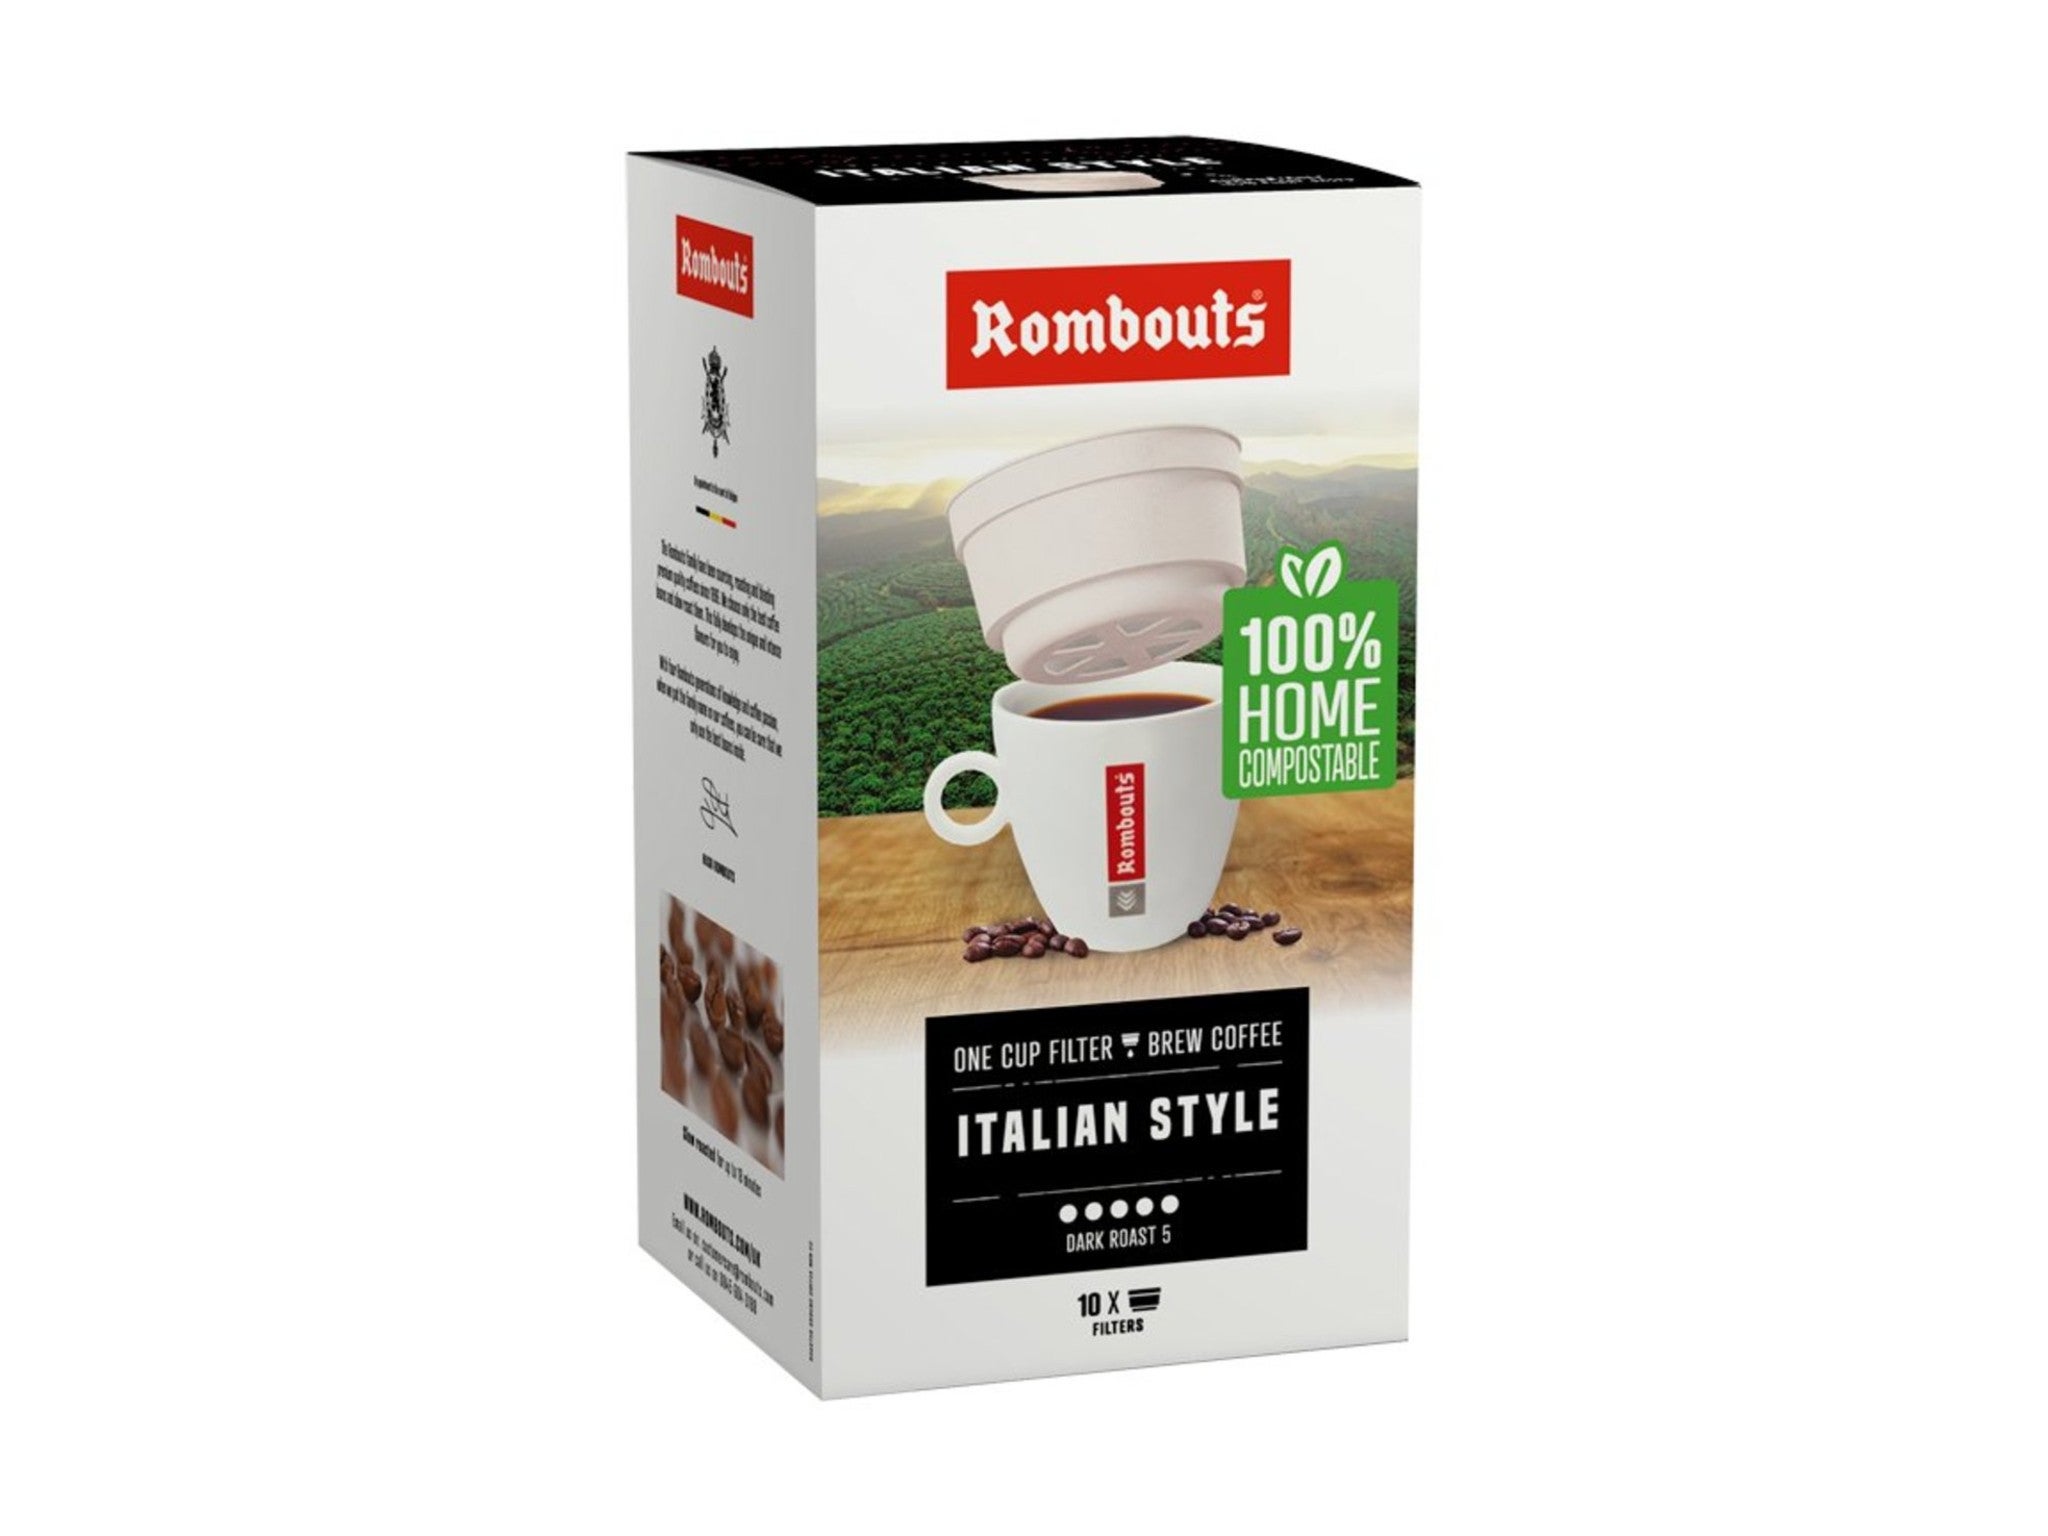 Rombouts one cup filters  indybest.jpeg